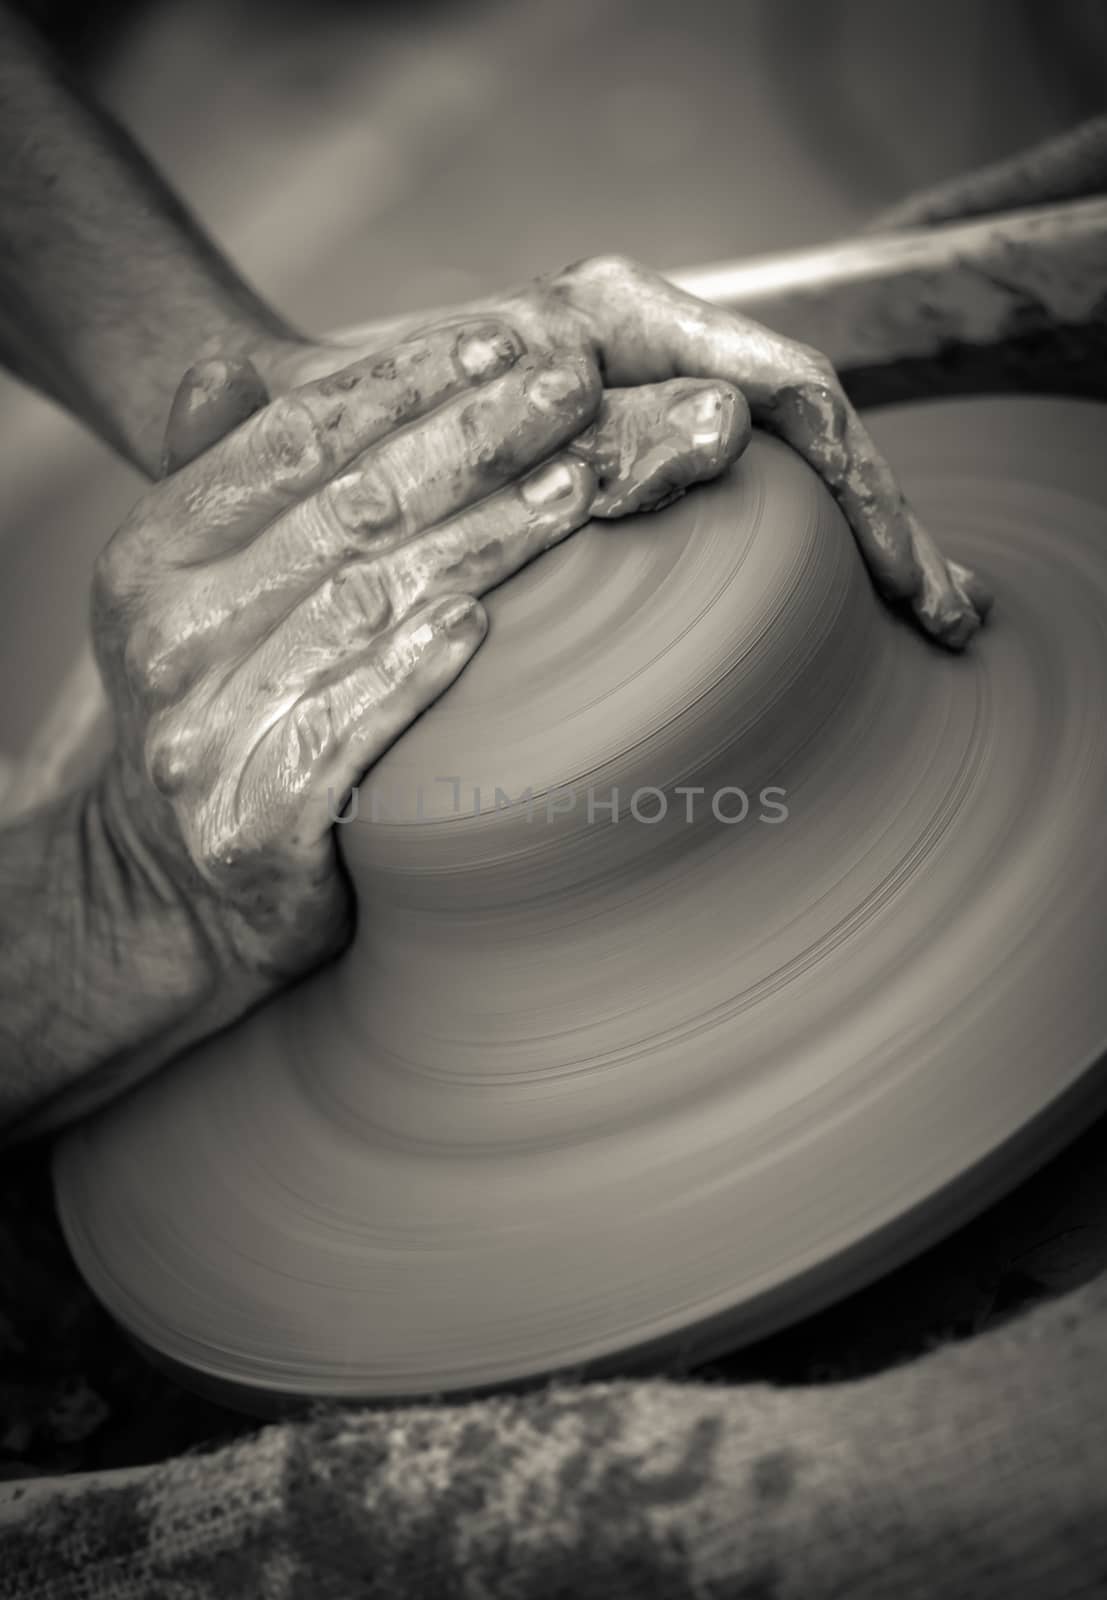 Hands working on pottery wheel , close up retro style toned photo wit shallow DOF